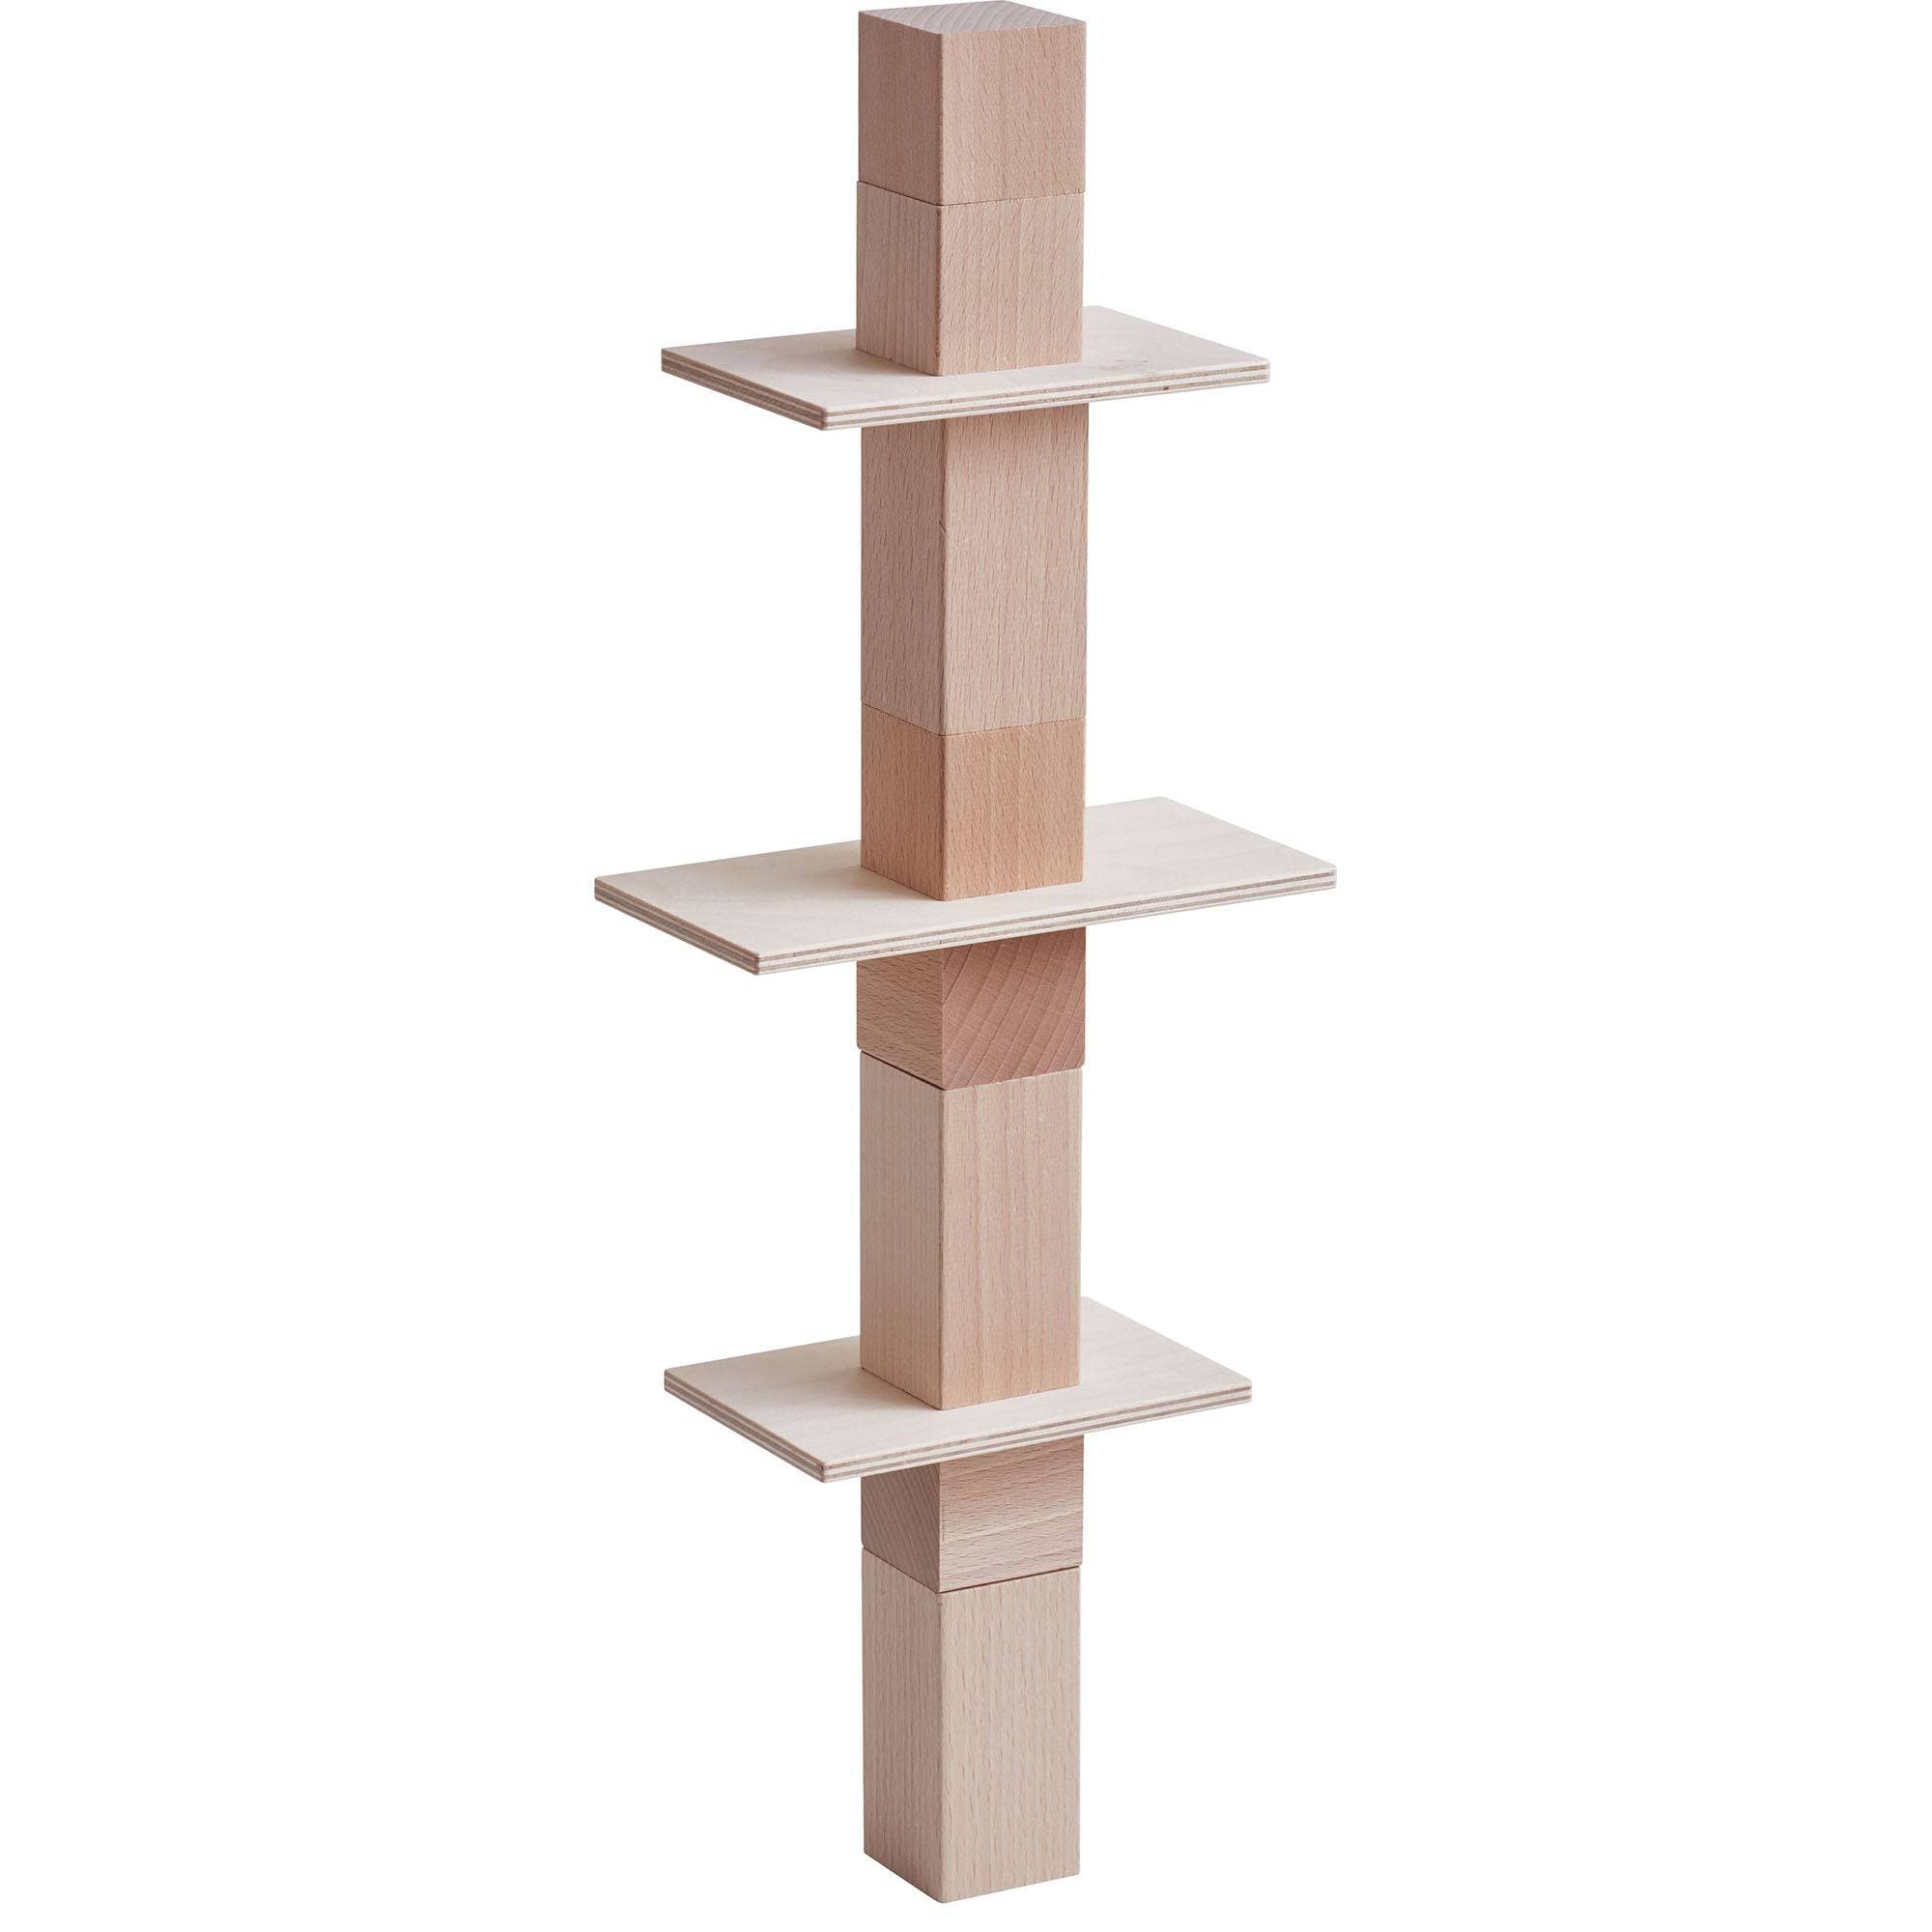 HABA USA Clever Up! Building Block System 2.0 Tower